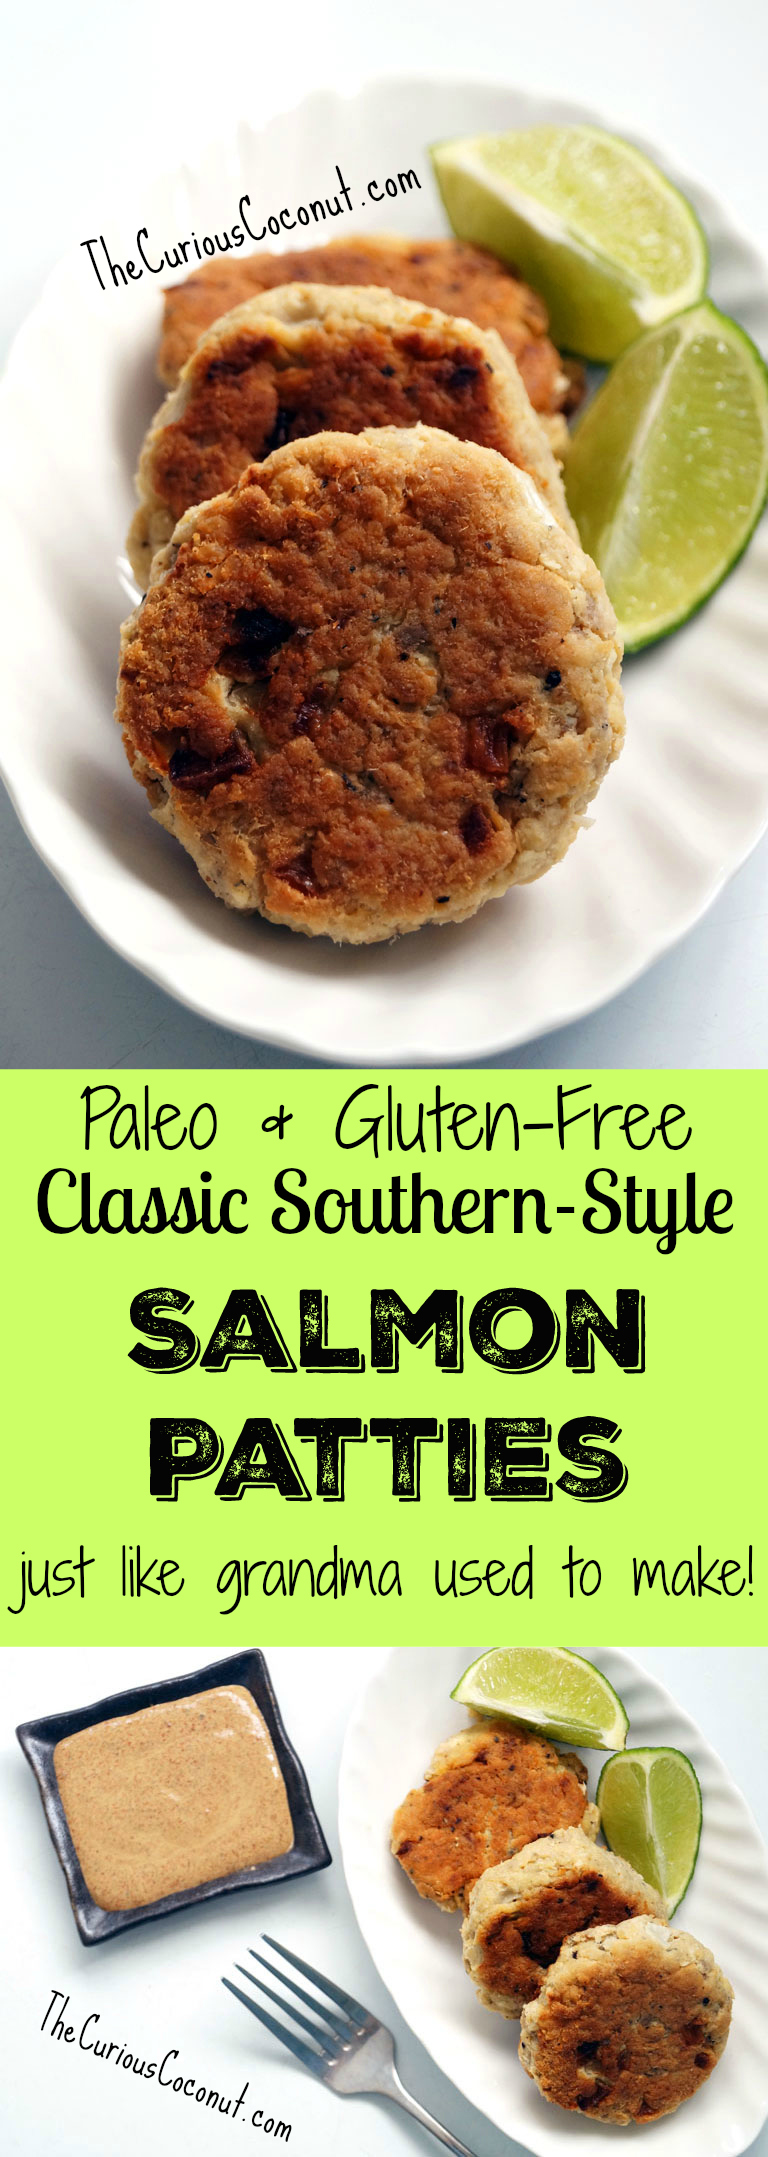 Just like Grandma used to make - Southern-style salmon patties with a secret sauce! Paleo and gluten-free. // TheCuriousCoconut.com